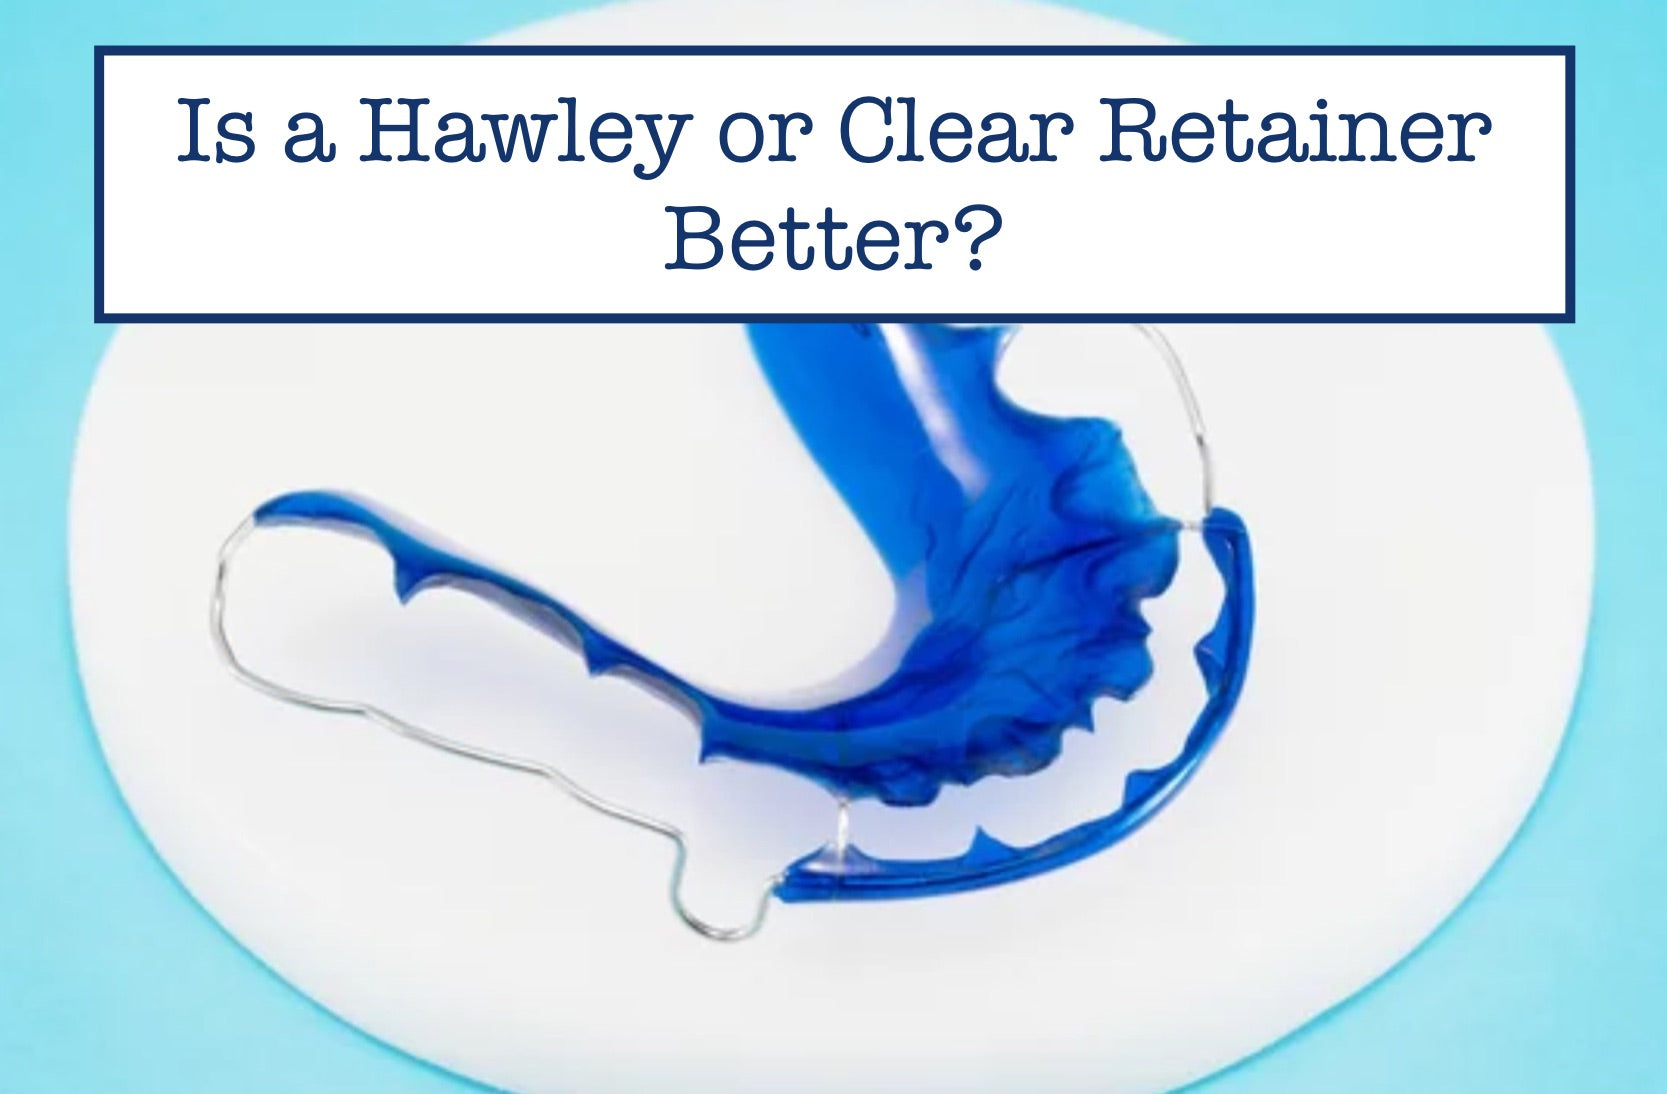 Is a Hawley or Clear Retainer Better?